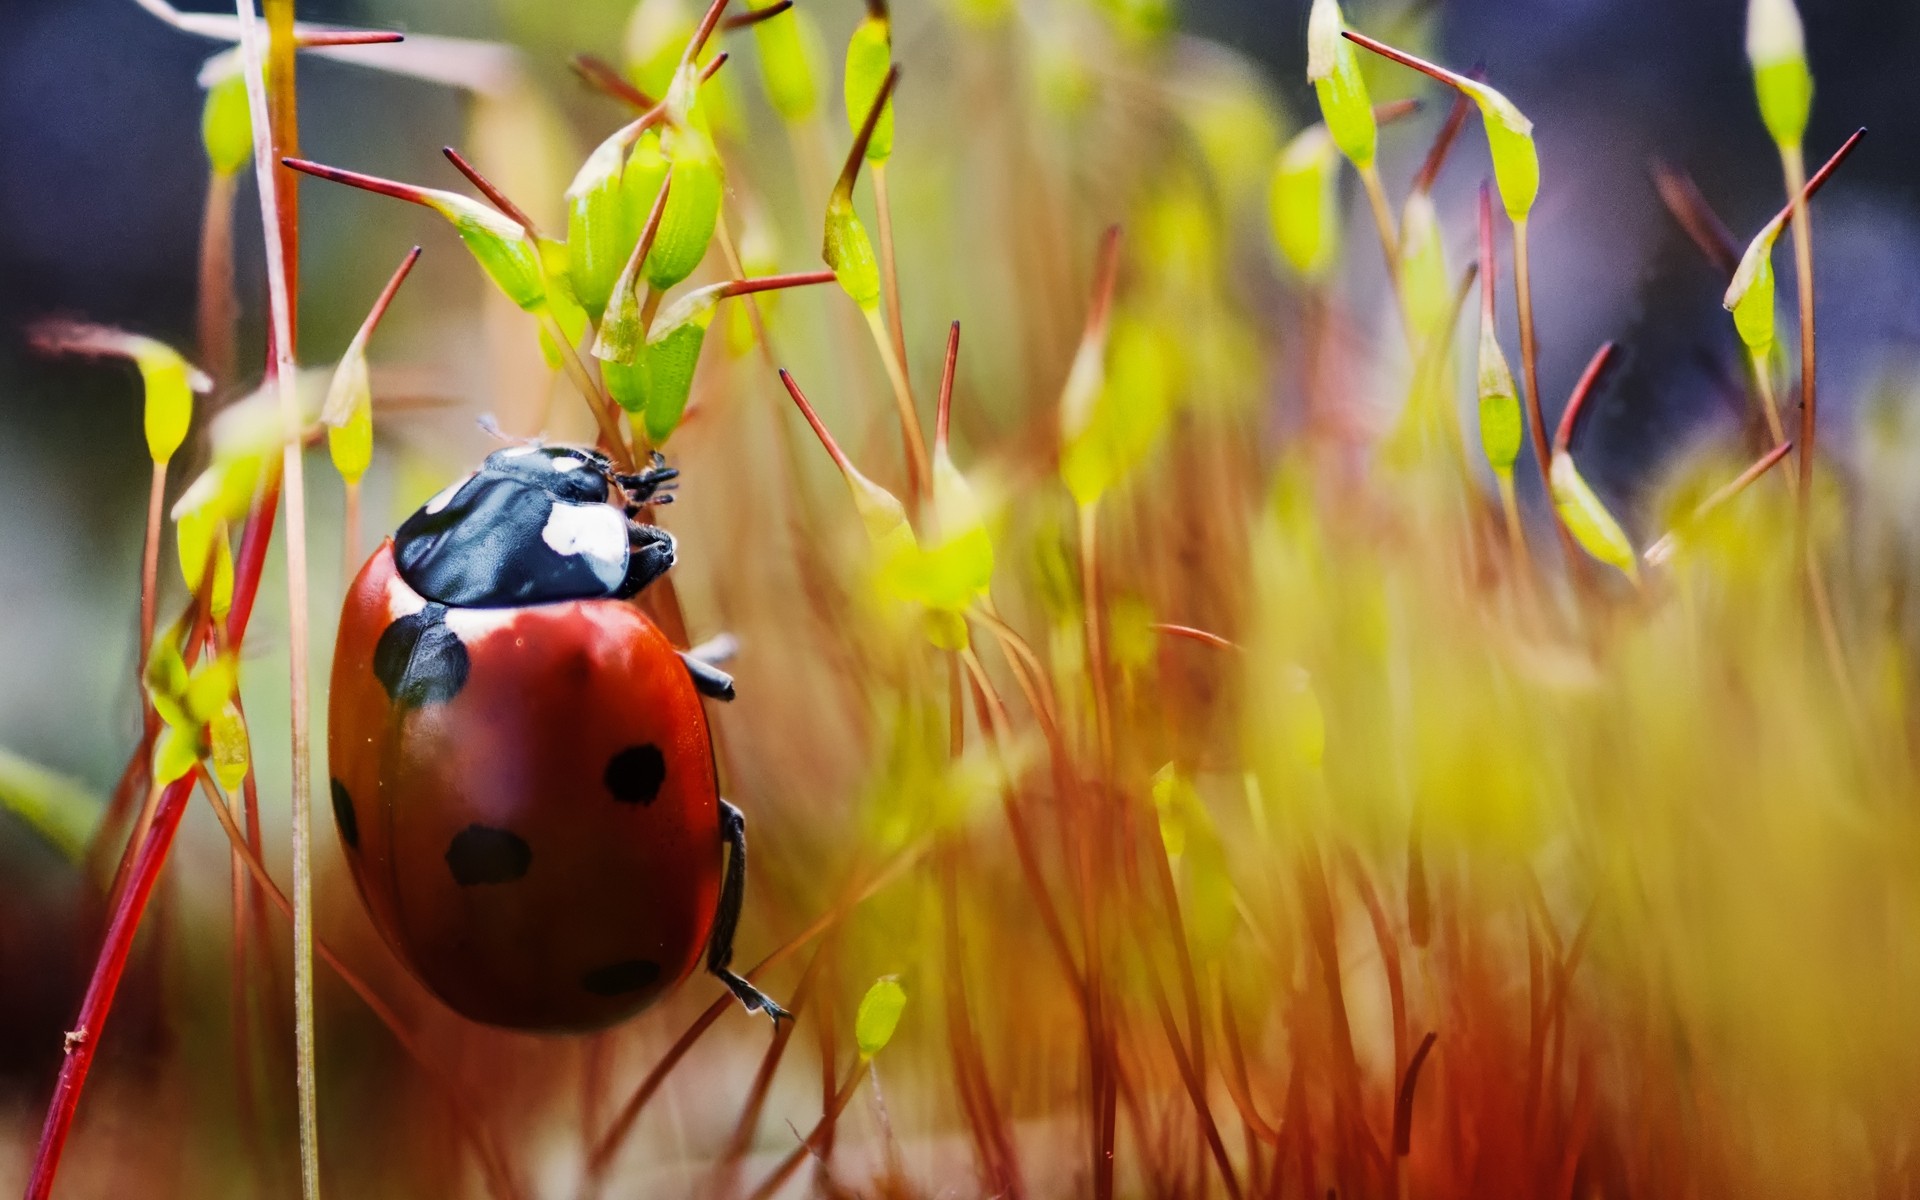 insects nature insect summer color flower outdoors bright leaf wildlife red ladybug ladybug macro grass